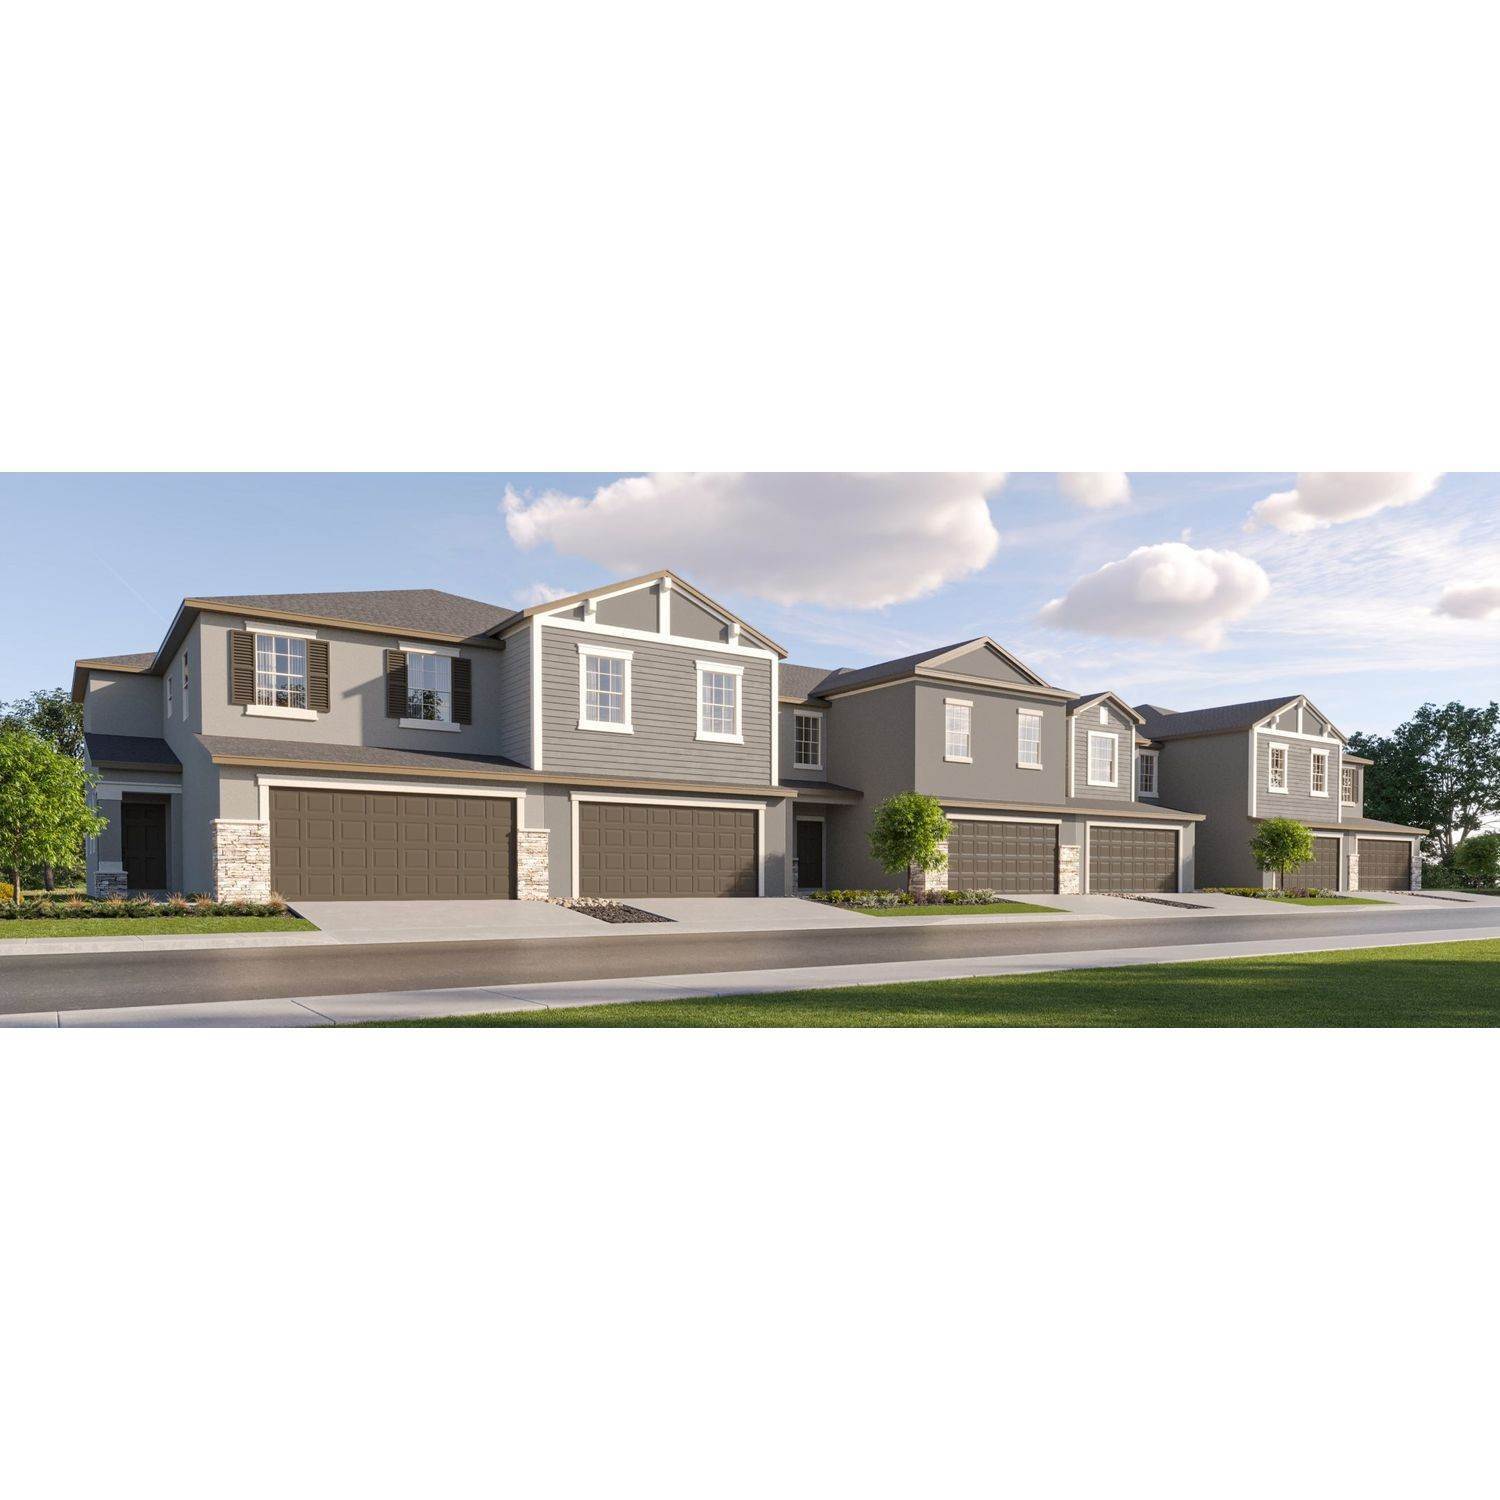 Angeline - The Townhomes xây dựng tại 17516 Nectar Flume Drive, Land O' Lakes, FL 34638